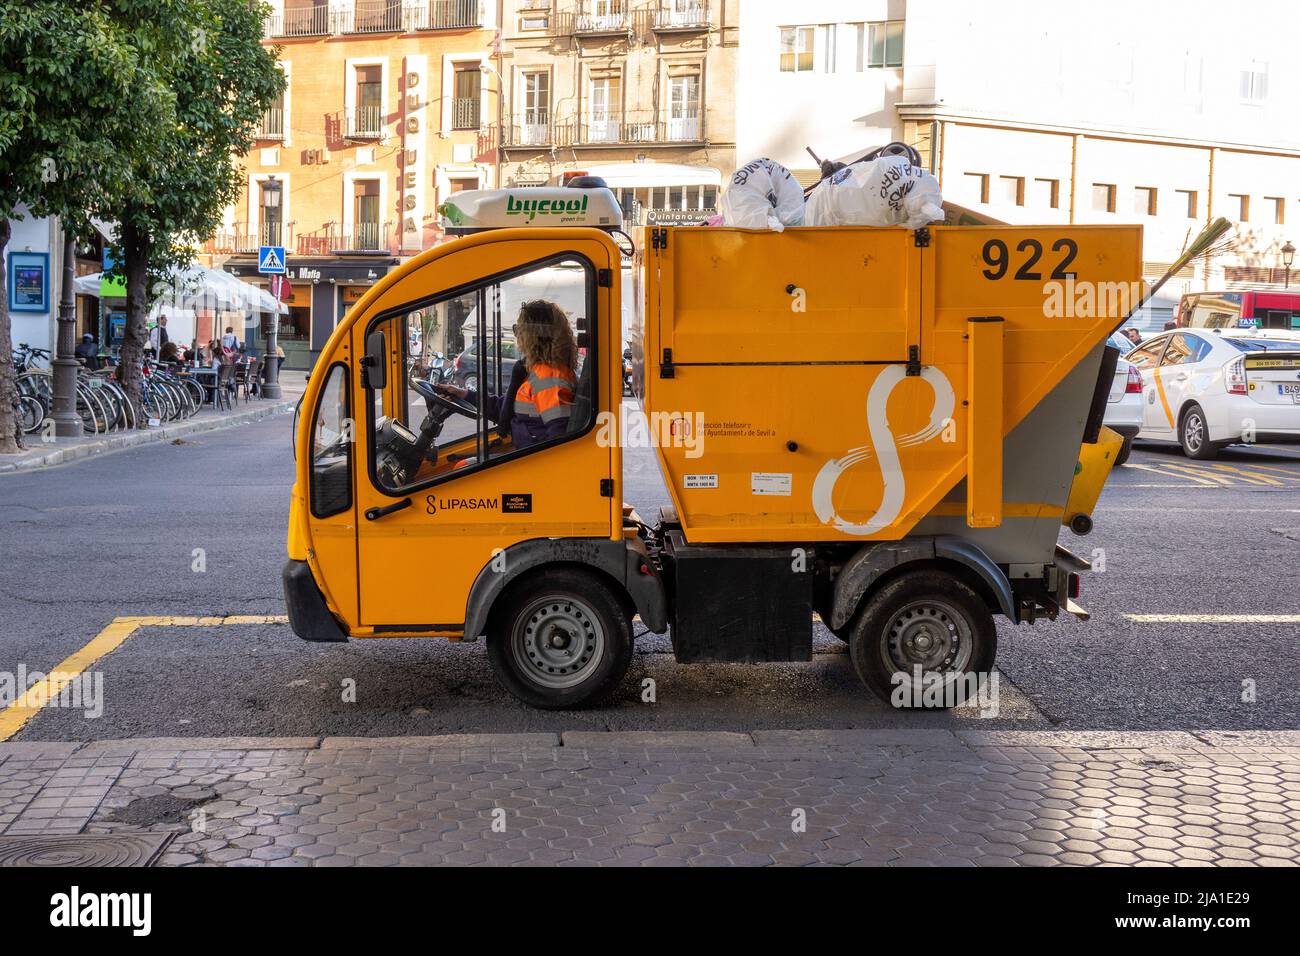 Cit-E-Fox Small Electric Garbage Bin Truck From Seville Municipal Cleaning Company Of Lipasam Seville Spain Stock Photo